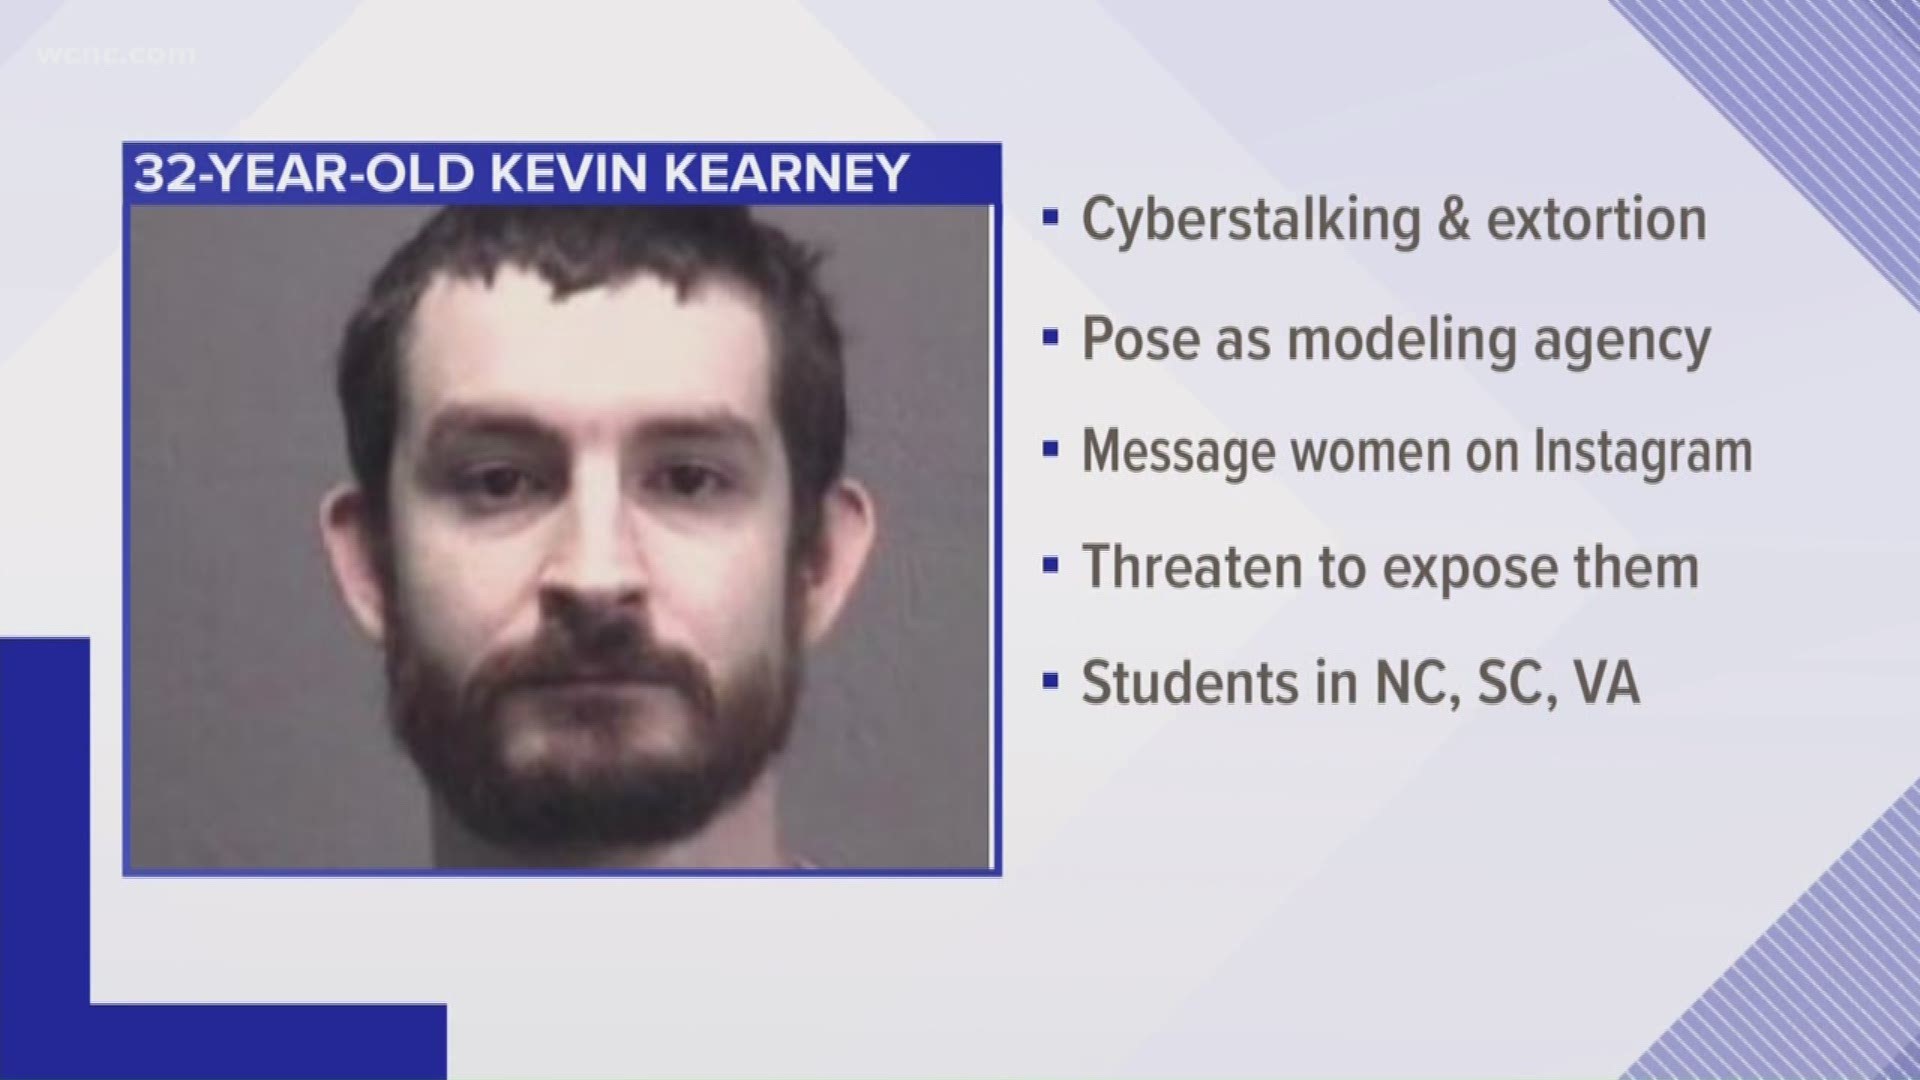 Authorities have arrested Kevin Kearney on cyberstalking and extortion charges, saying he would pose as a modeling agency on Instagram and message women to send photos.